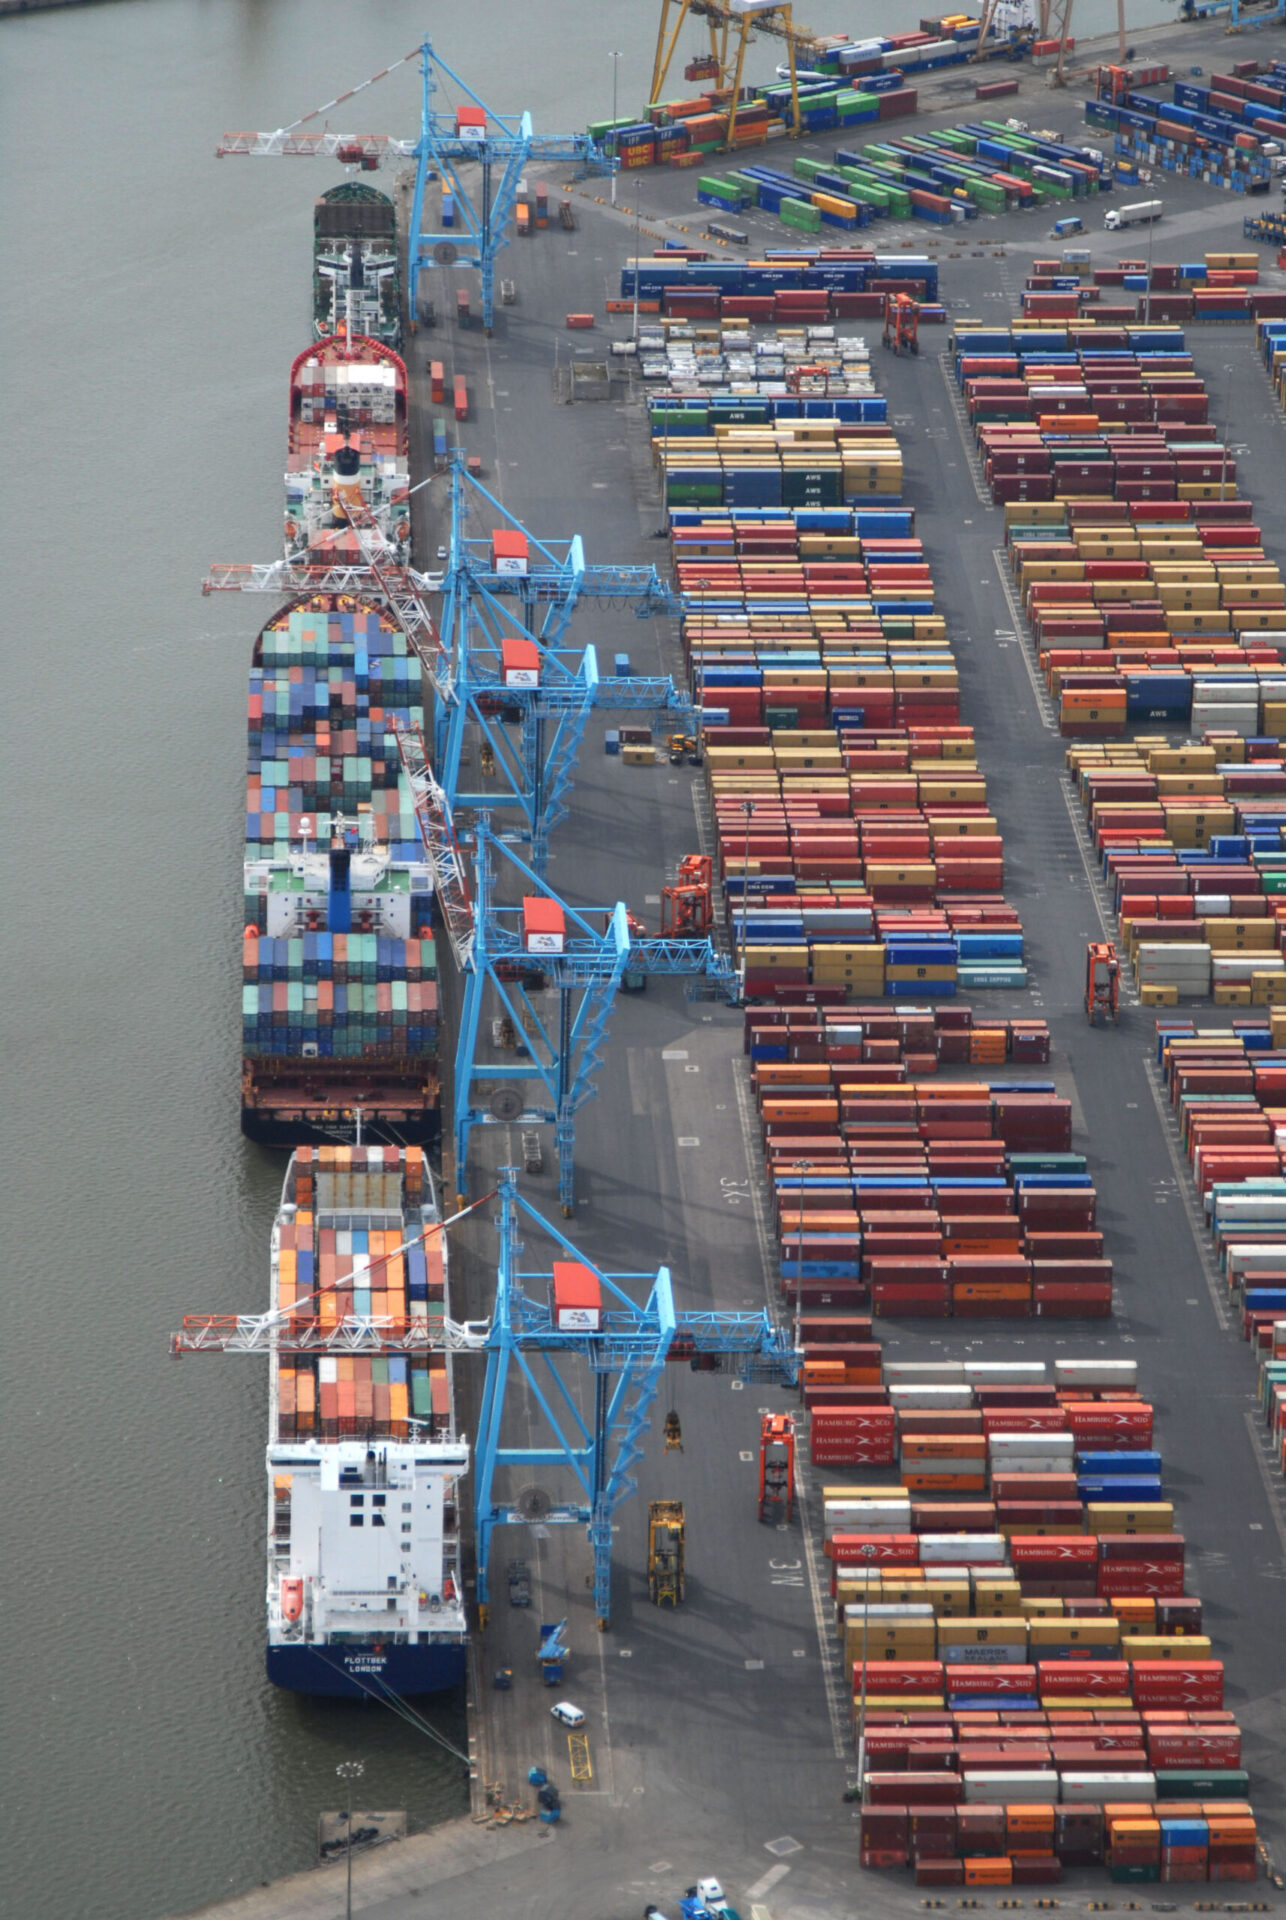 Royal Seaforth Container Terminal at Port of Liverpool